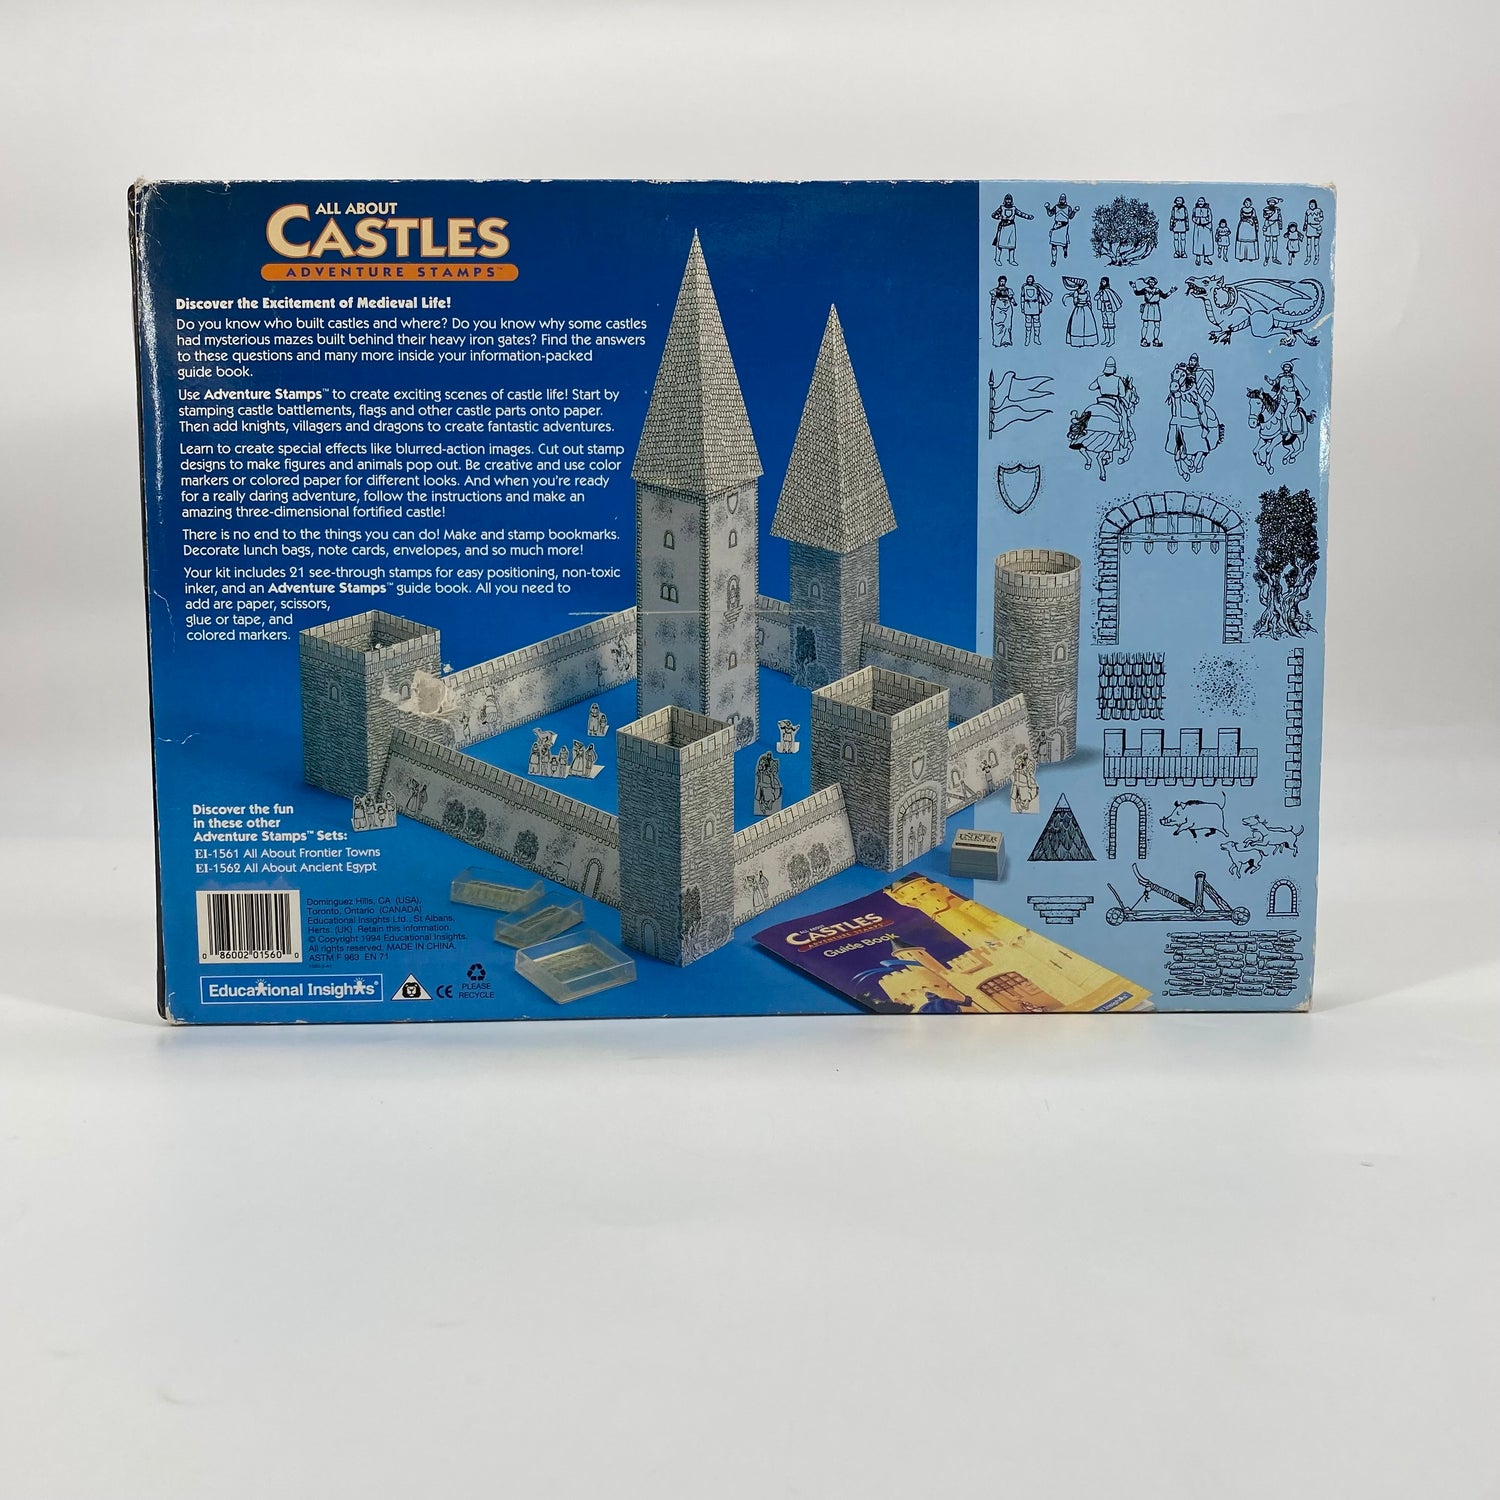 All about castles